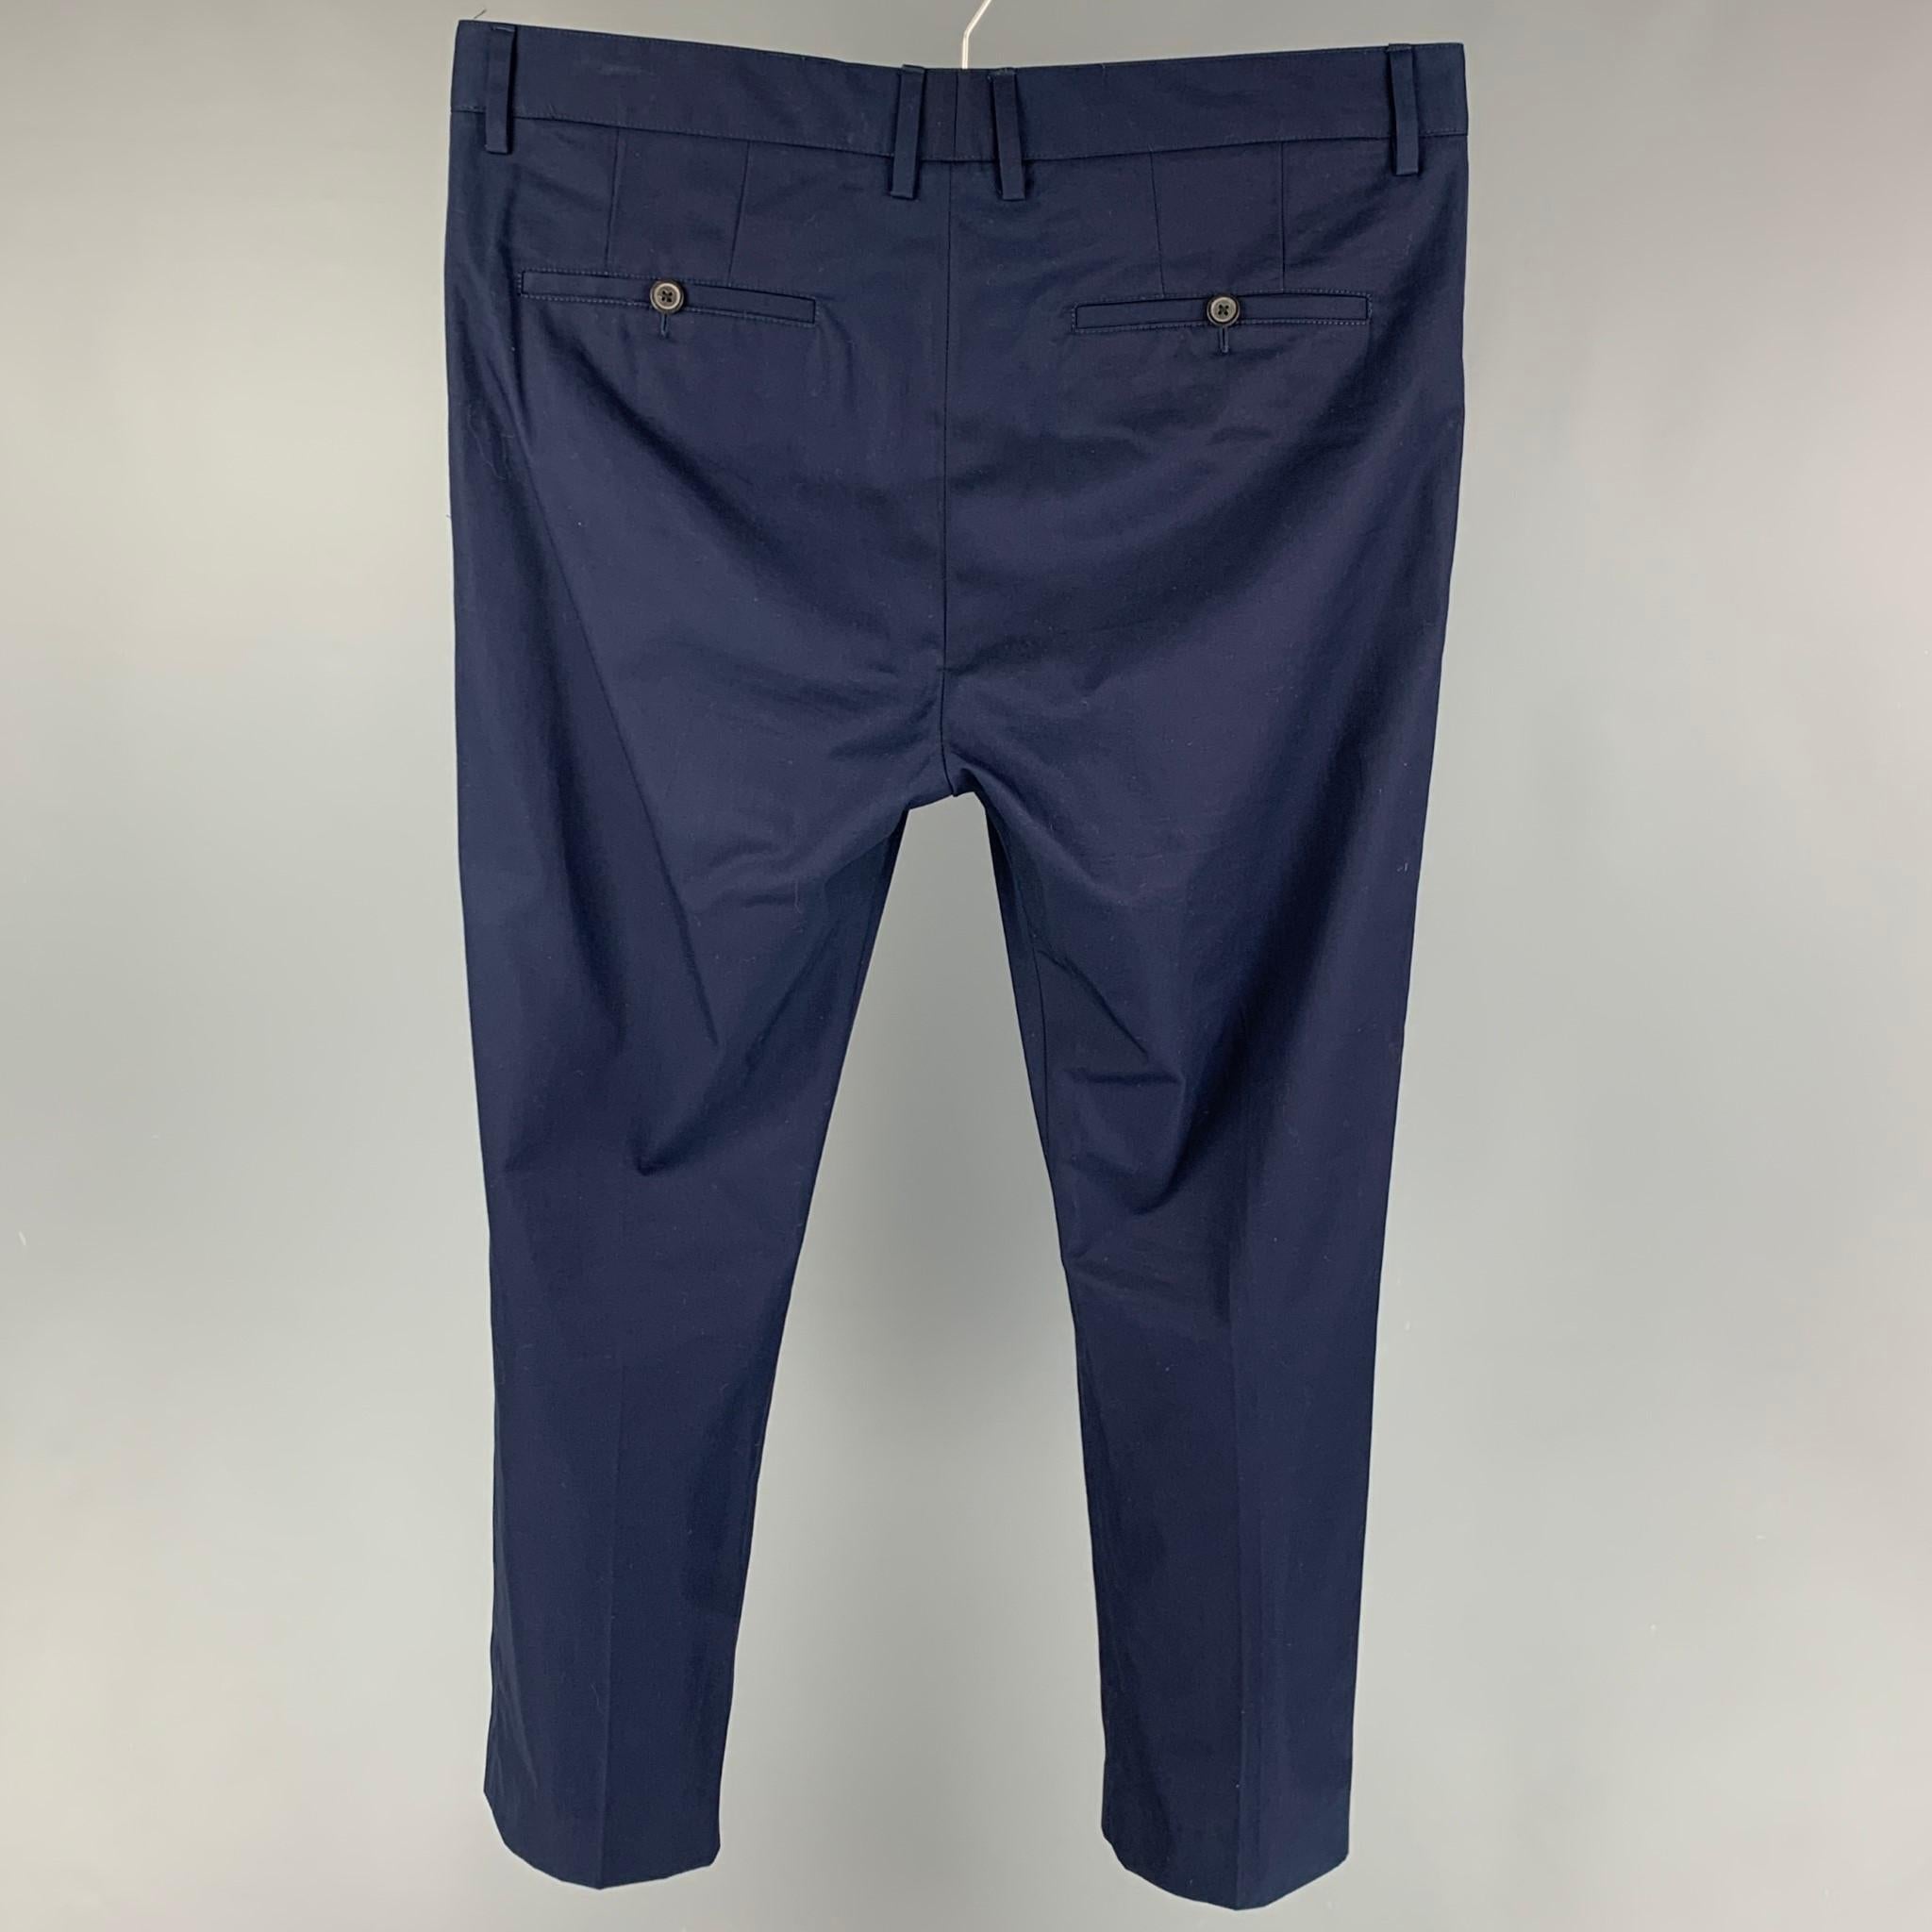 LANVIN casual pants comes in a navy cotton featuring a slim fit, drawstring, and a zip fly closure. 

Very Good Pre-Owned Condition.
Marked: 48

Measurements:

Waist: 36 in.
Rise: 12.5 in.
Inseam: 26 in. 